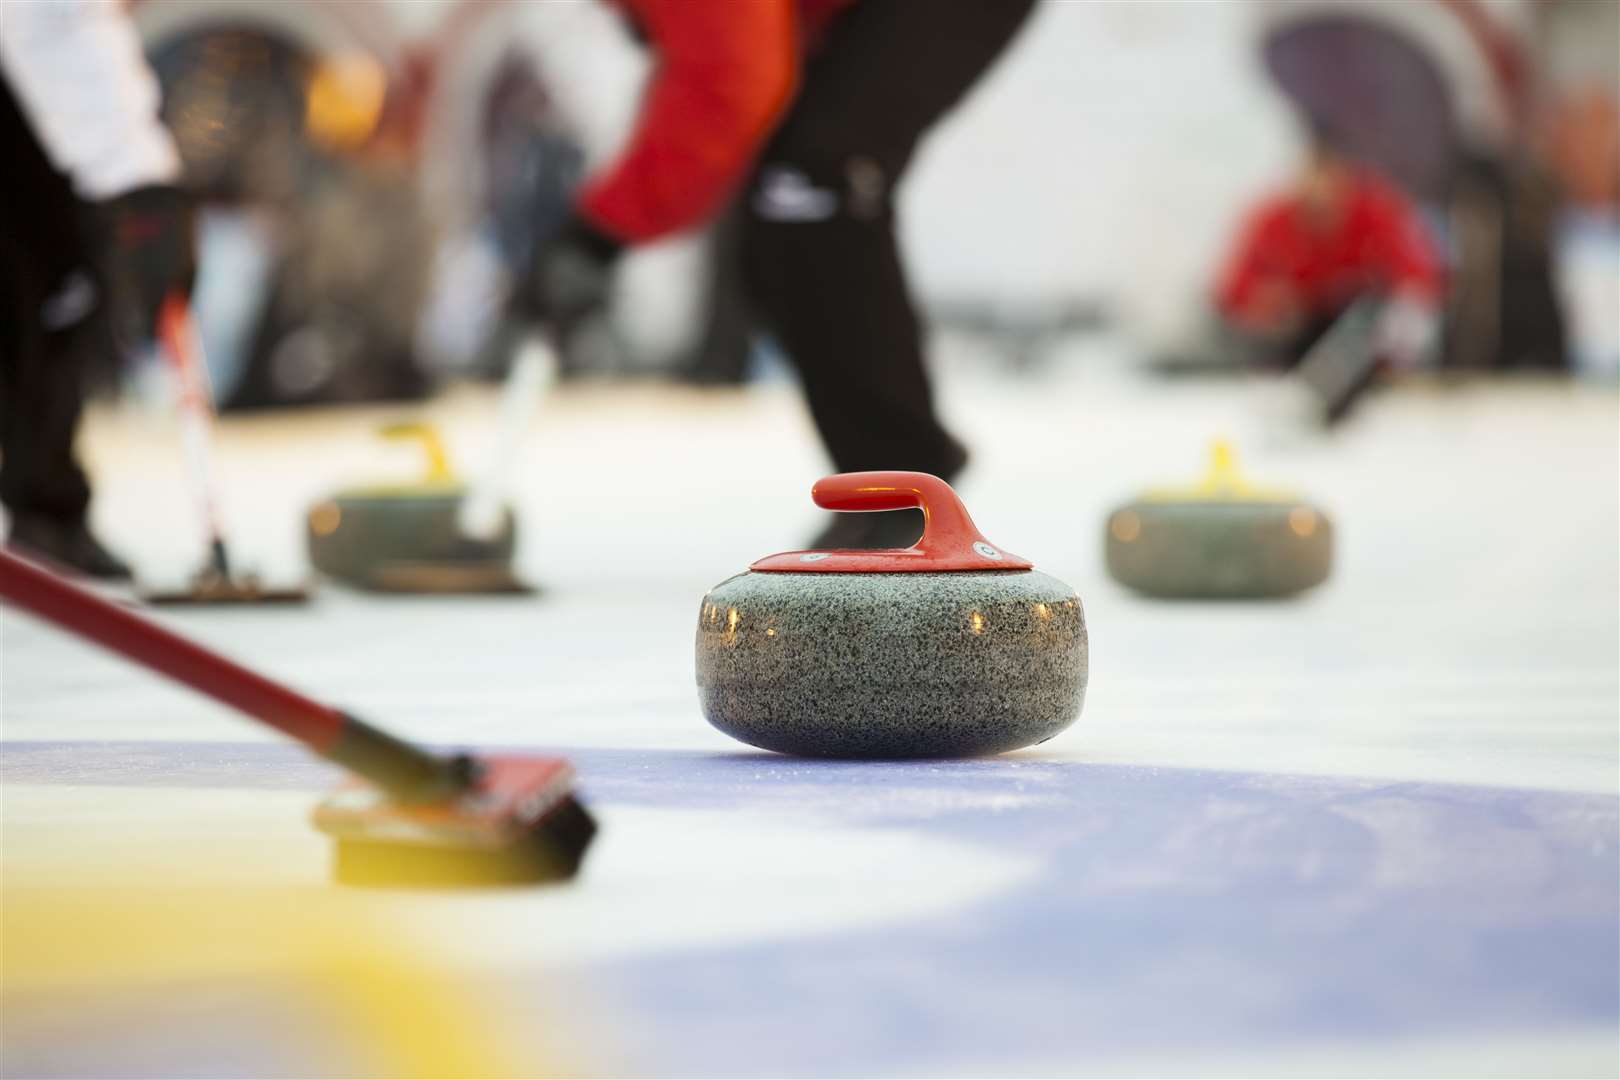 The national governing body Scottish Curling hopes youngsters will take an interest in the sport following the success of the Team GB women.